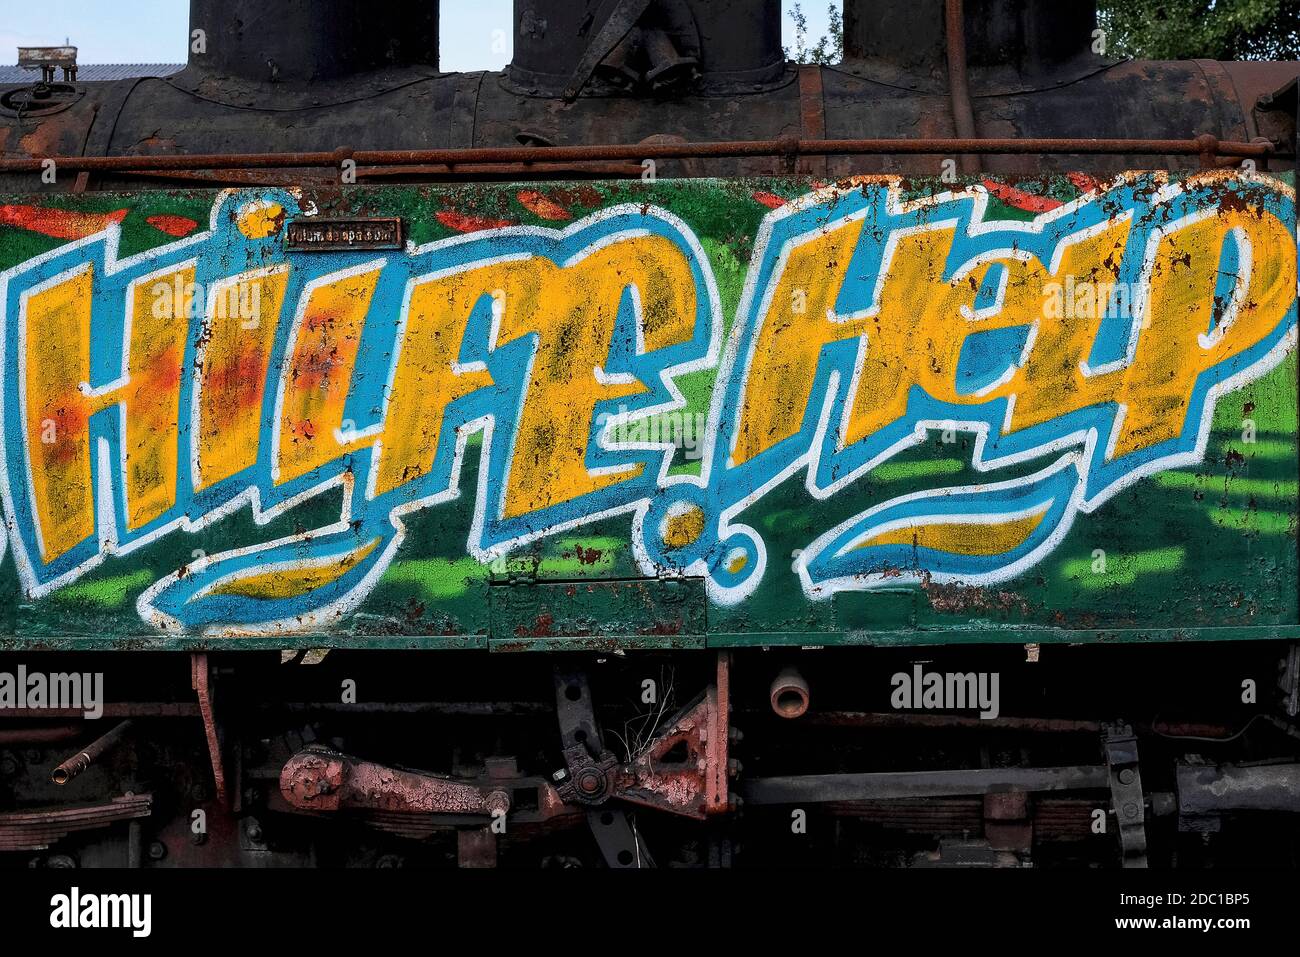 ‘Hilfe’ and ‘Help’ bilingual pleas in German and English colourful spray can graffiti on a rusting steam locomotive awaiting restoration (in 2008) at the former north east terminus in Heidenreichstein, Gmünd, Lower Austria, of the Waldviertelbahn or Waldviertler Schmalspurbahn.  The railway is a former industrial 760 mm narrow gauge network today preserved and run by the provincial government and enthusiasts as a heritage attraction. Stock Photo